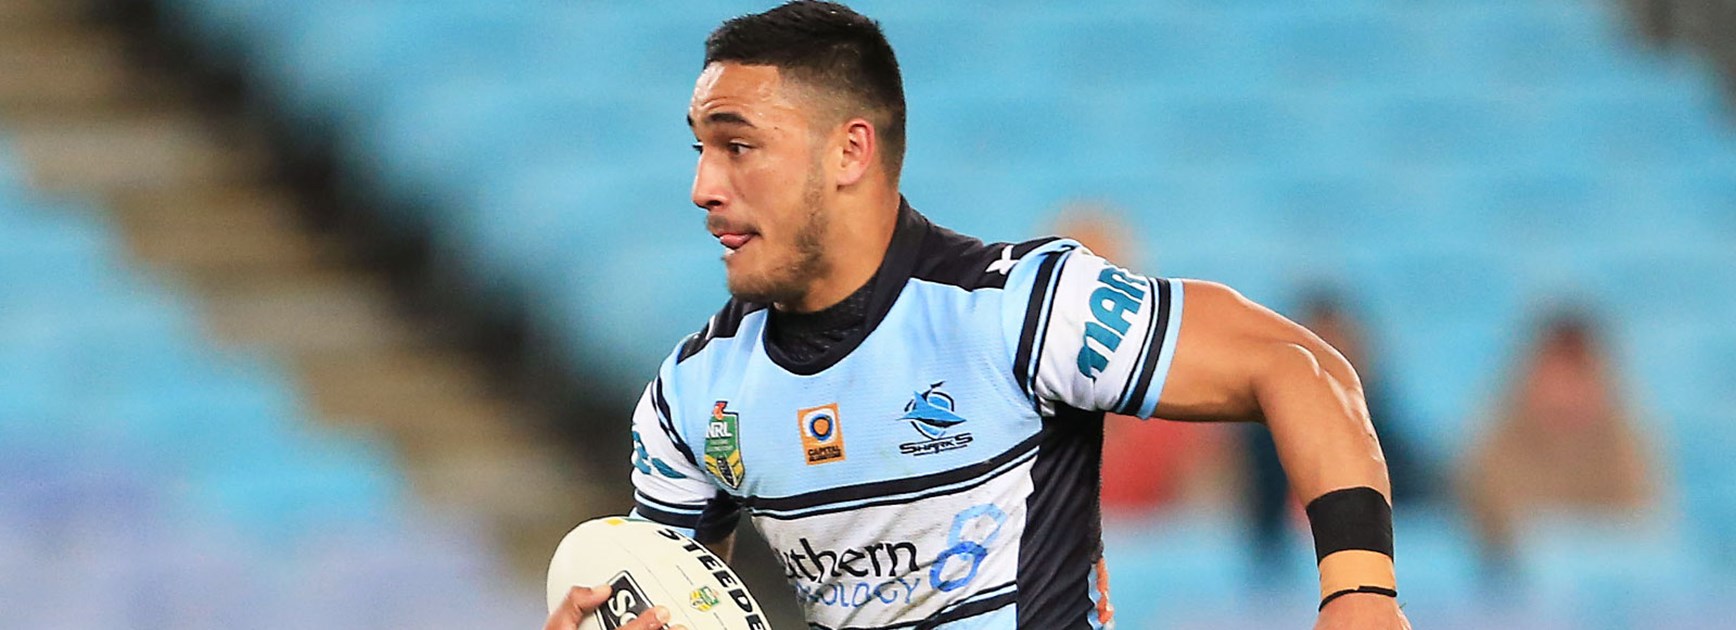 Valentine Holmes is set for a move to fullback for the Sharks in 2017.